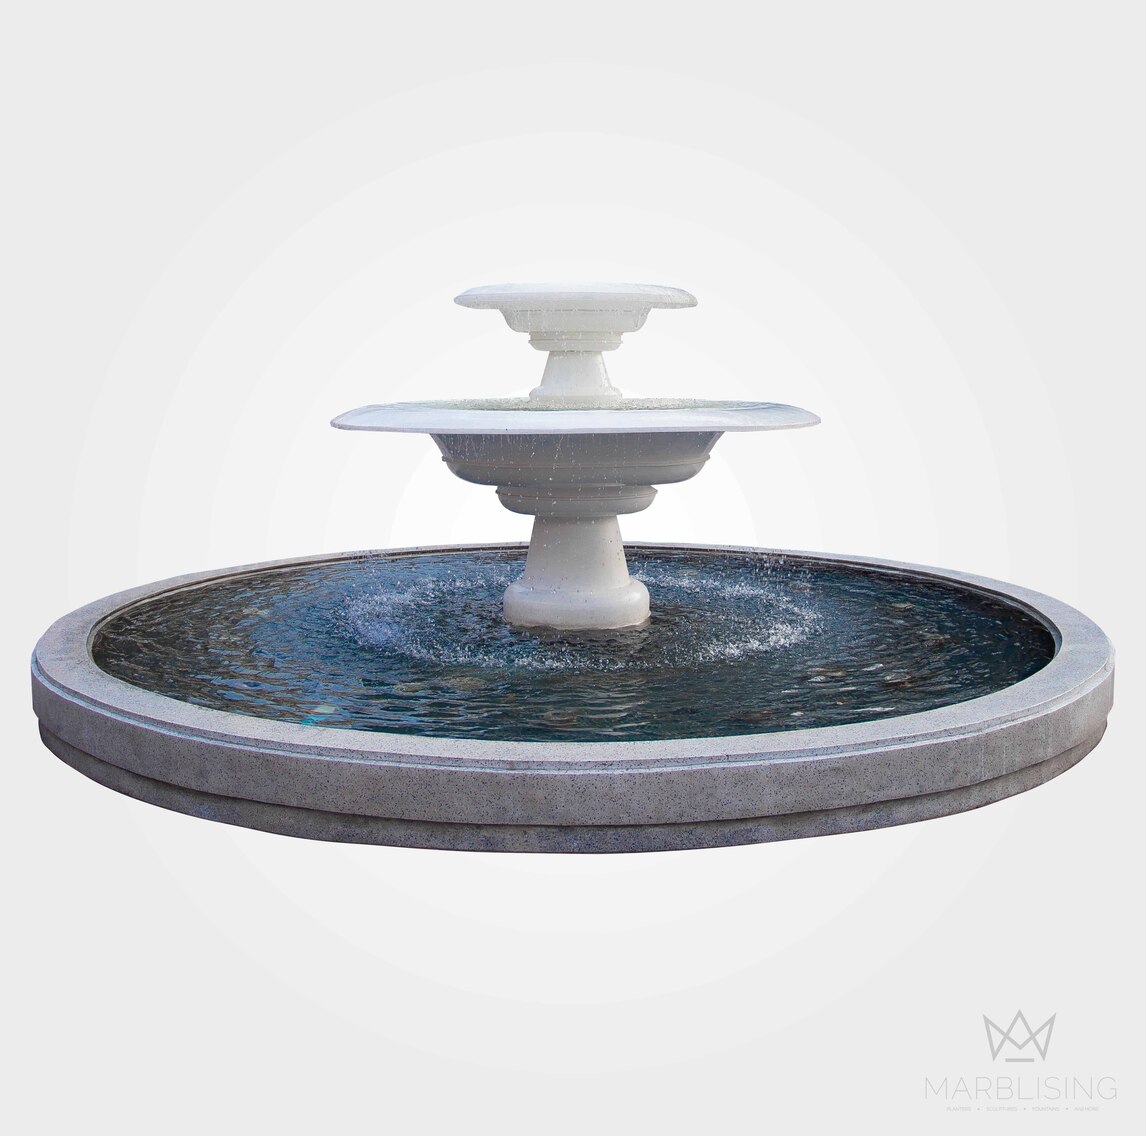 Bella 2-Tier Fountain with Pool